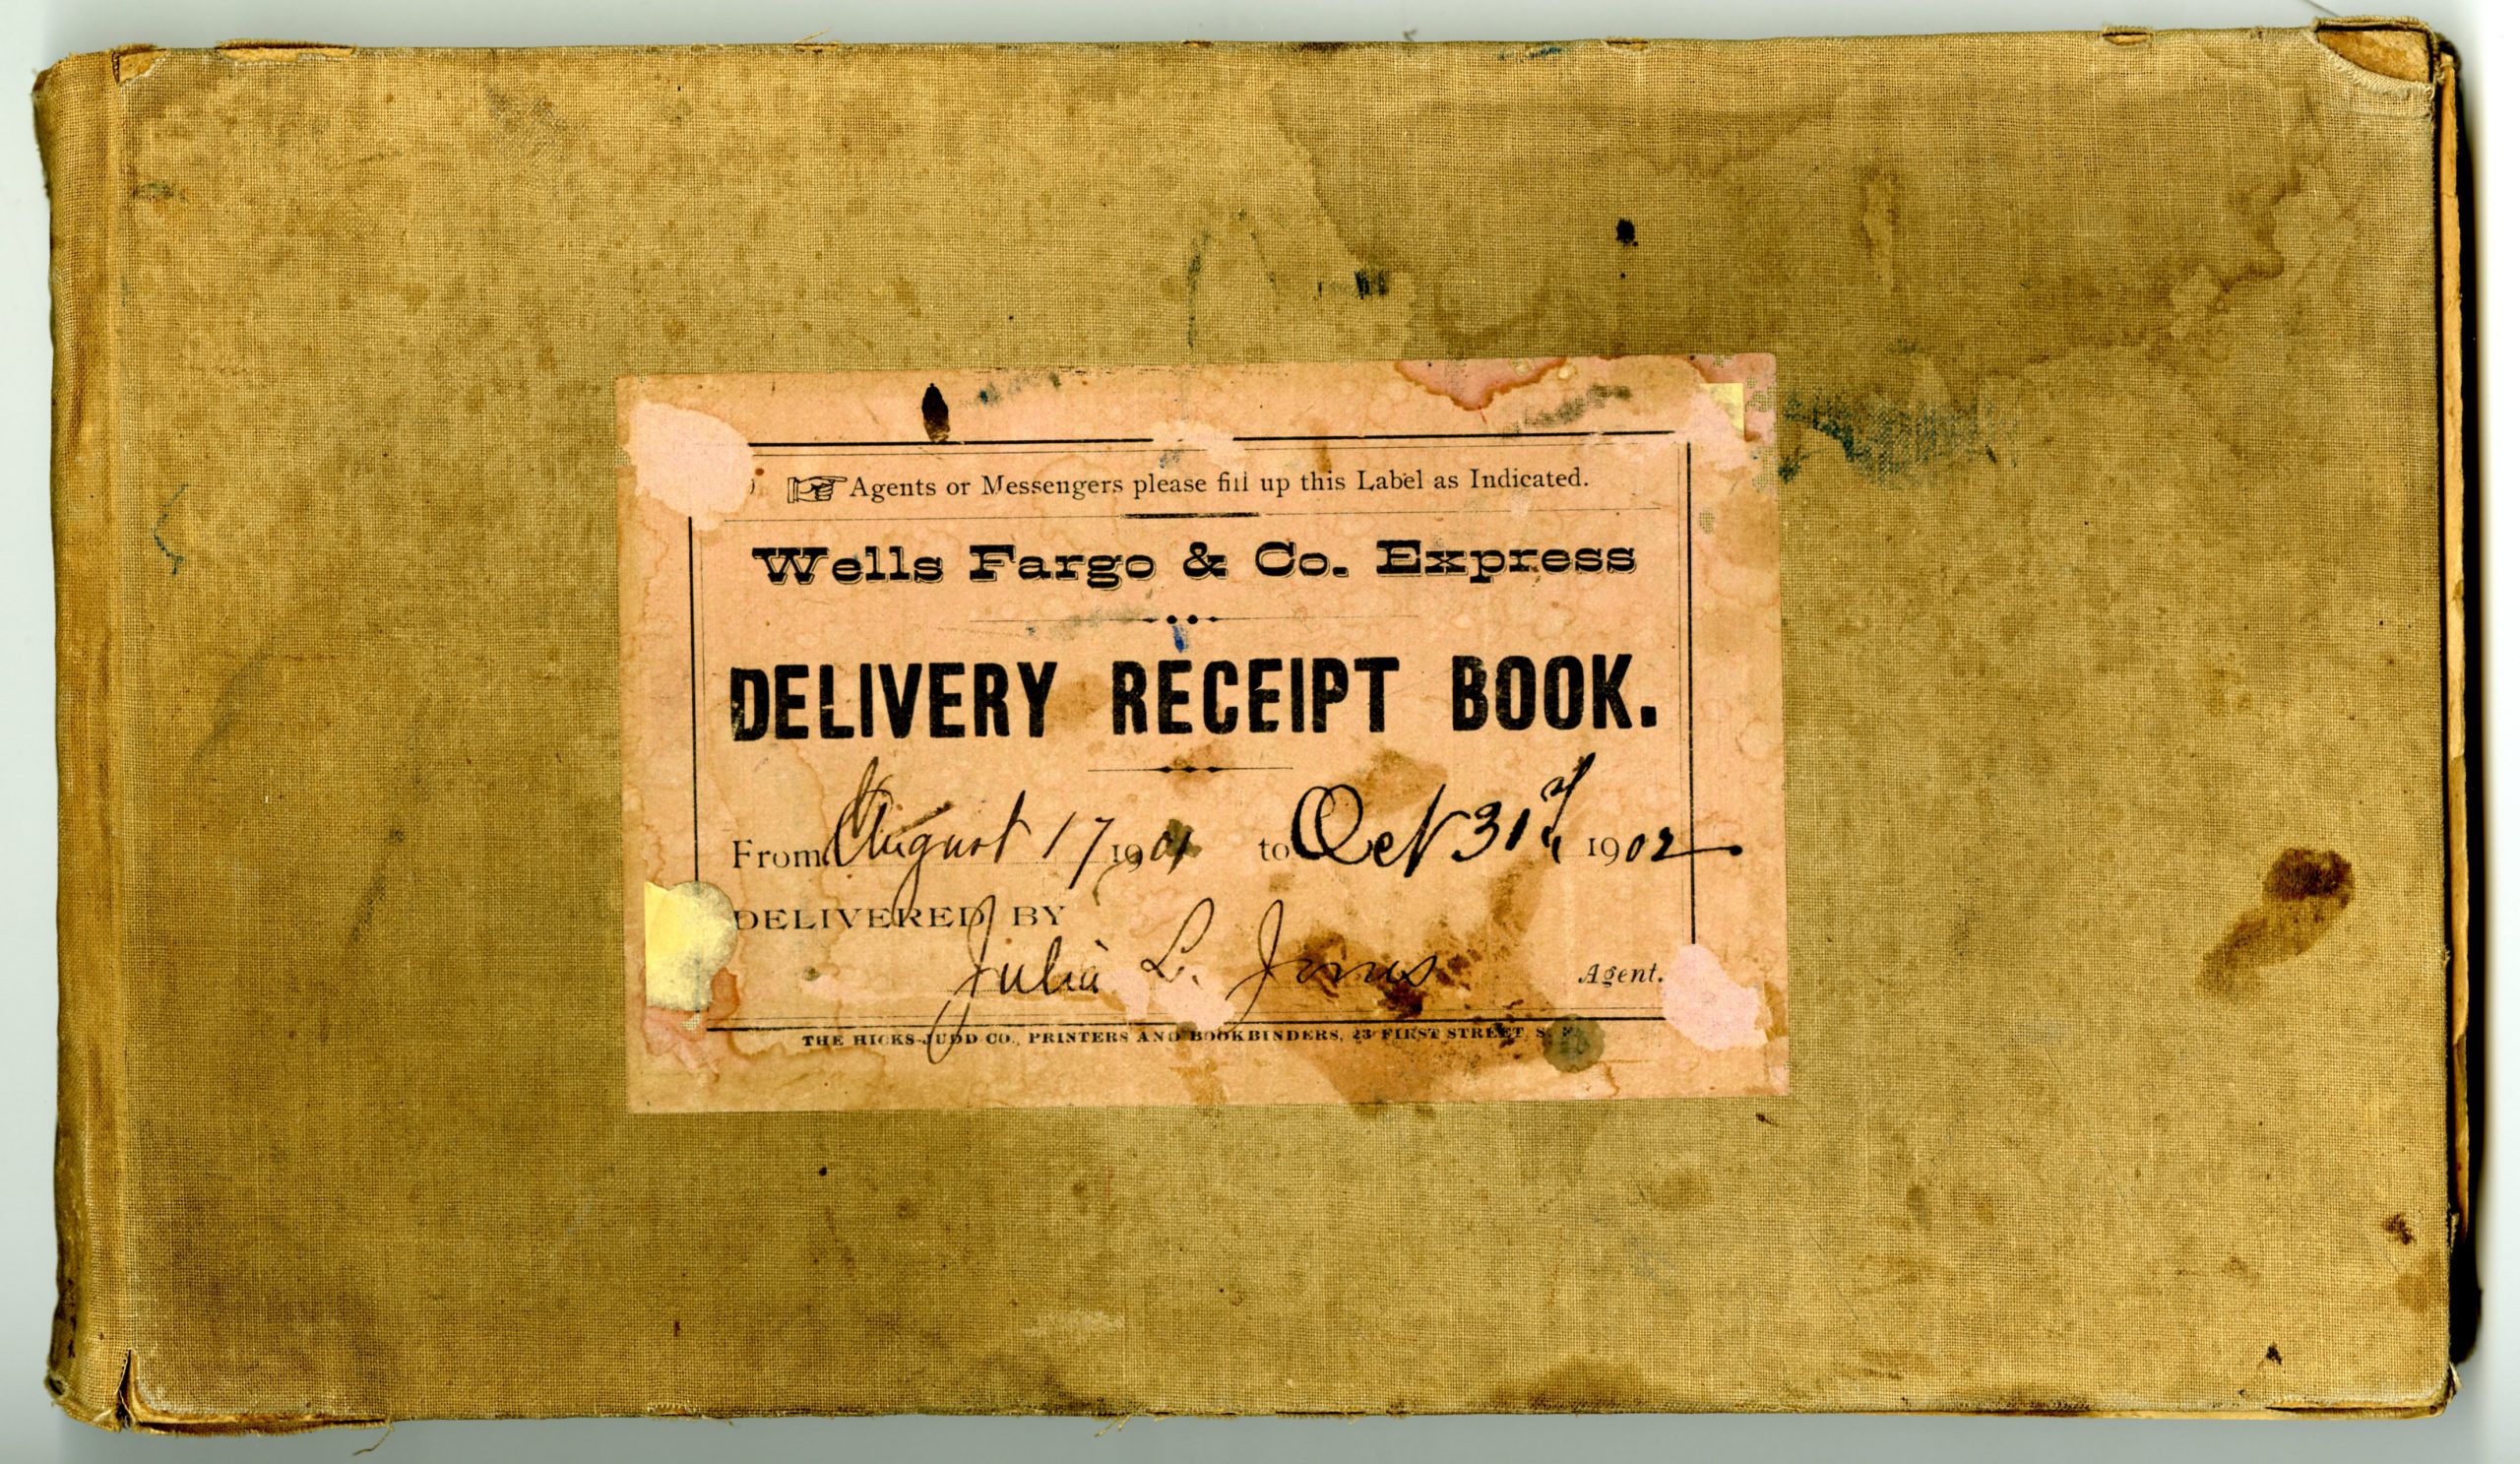 An aged and yellowed book is opened to a page that says: Received of Wells Fargo & Company Express at their office in 1901 in good order, the following Articles set opposite our respective names. There are handwritten entries below.